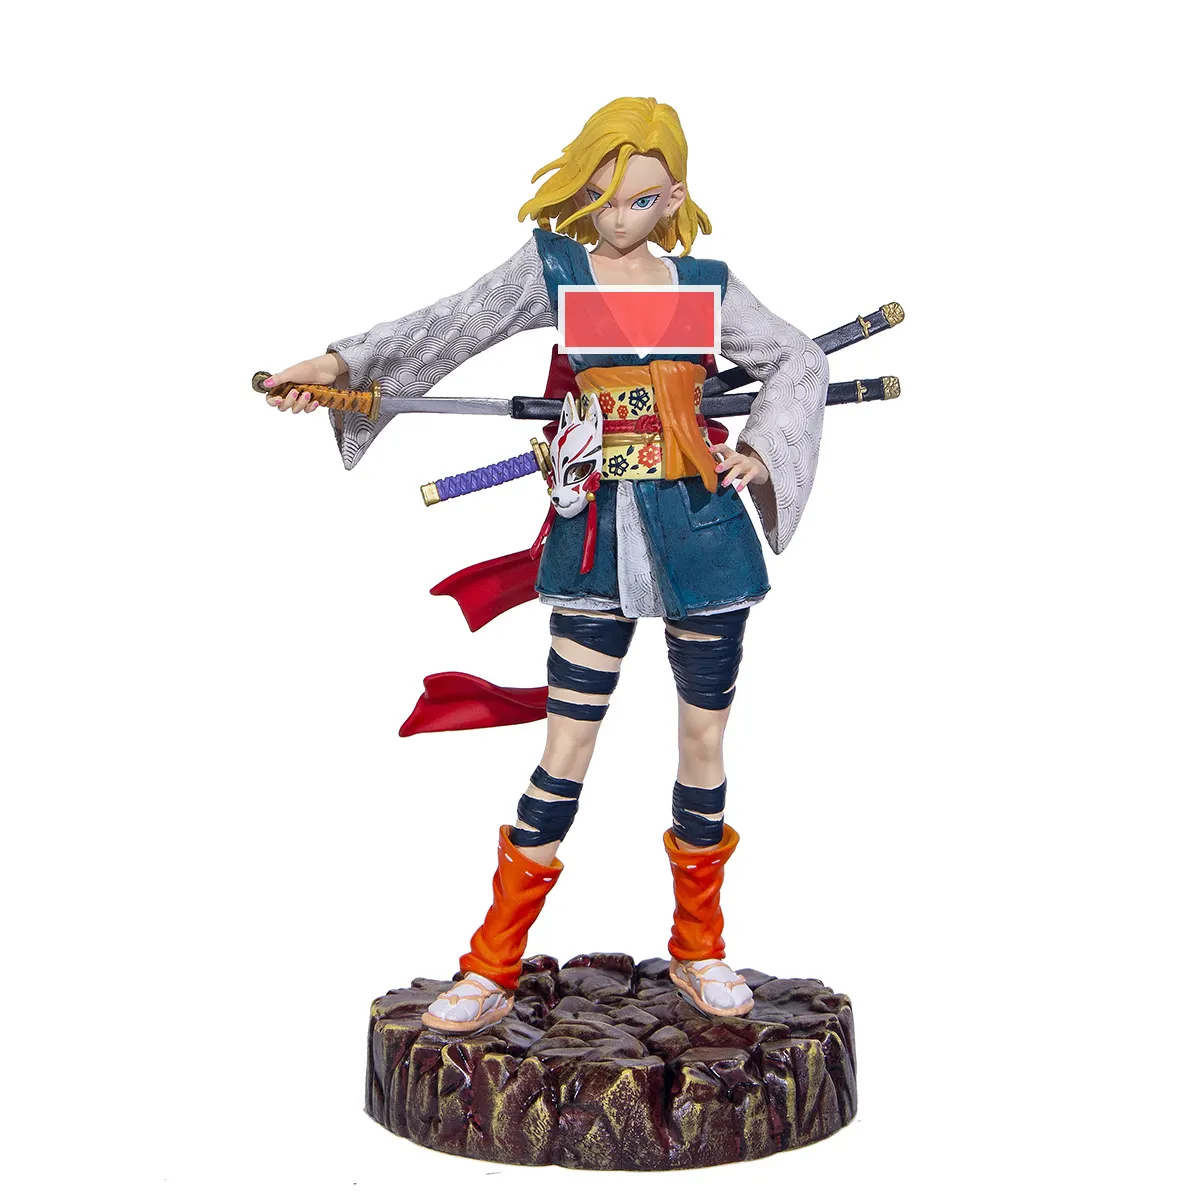 Anime figure Dragon Ba11 DBZ Figure Android 18 Action Figure PVC Model Toy Gift